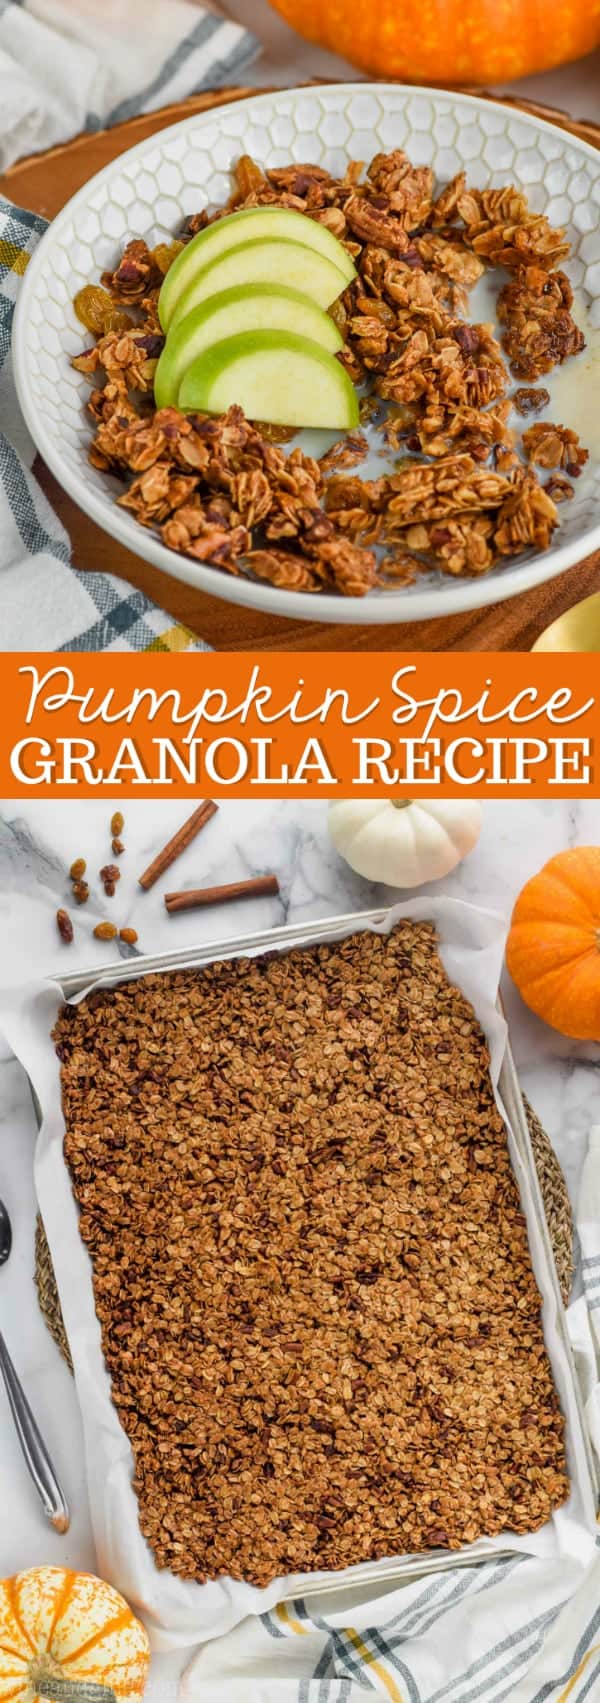 A collage of two images: in a small bowl of yogurt some Pumpkin Spice Homemade Granola and the other is a pan sheet of Pumpkin Spice Granola